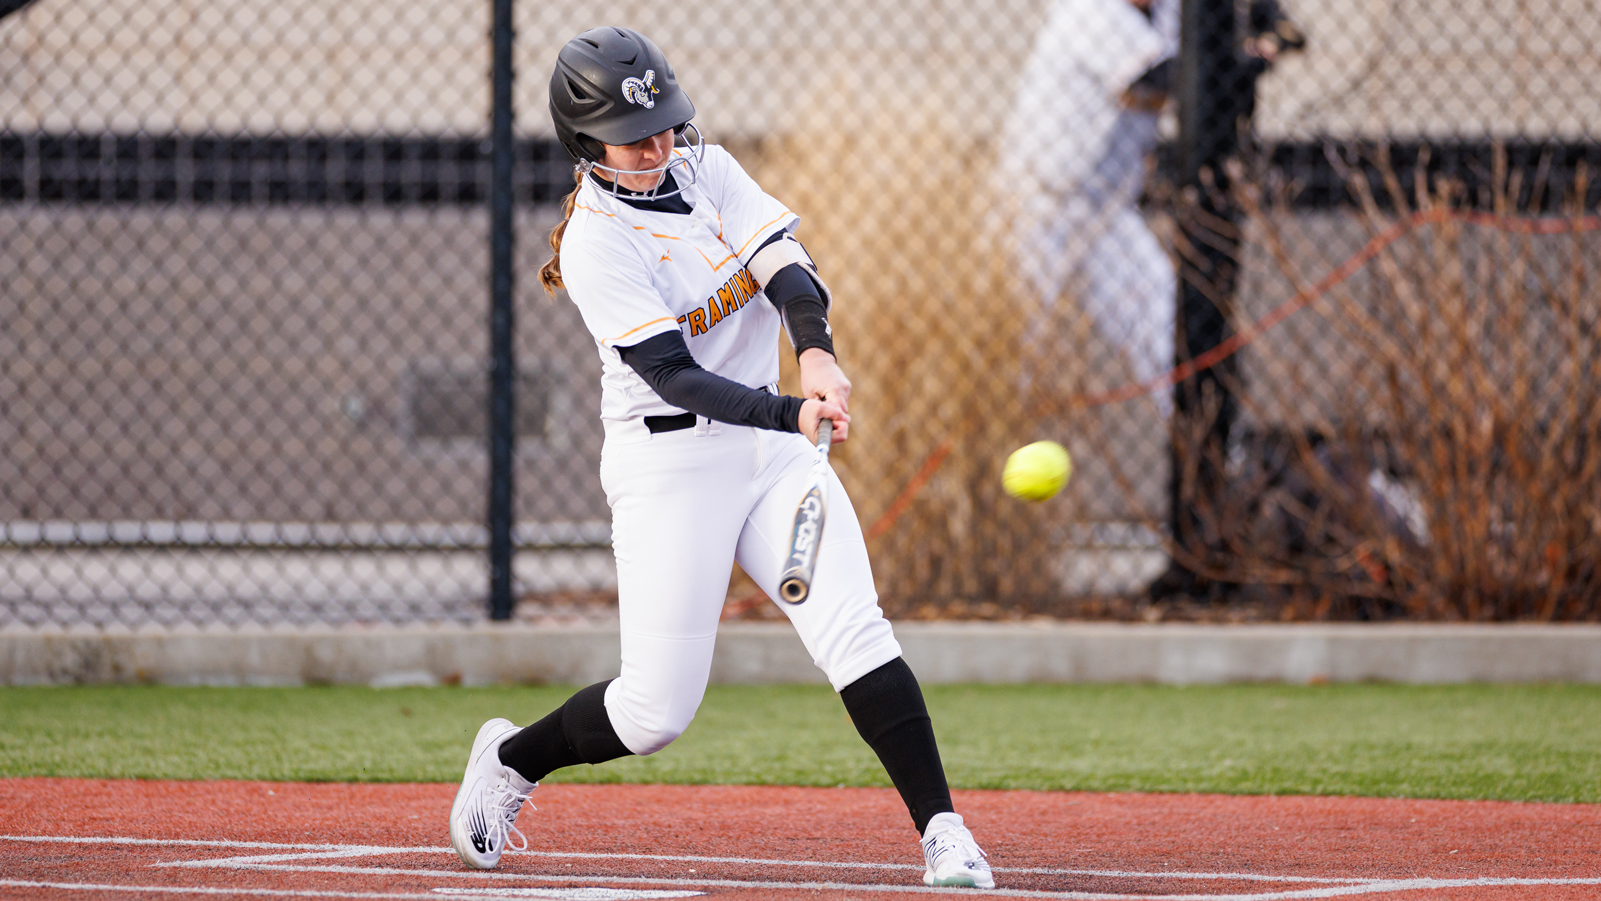 Top Seed Softball Advances in MASCAC Tournament with 8-0 Victory over Fourth Seed Westfield State